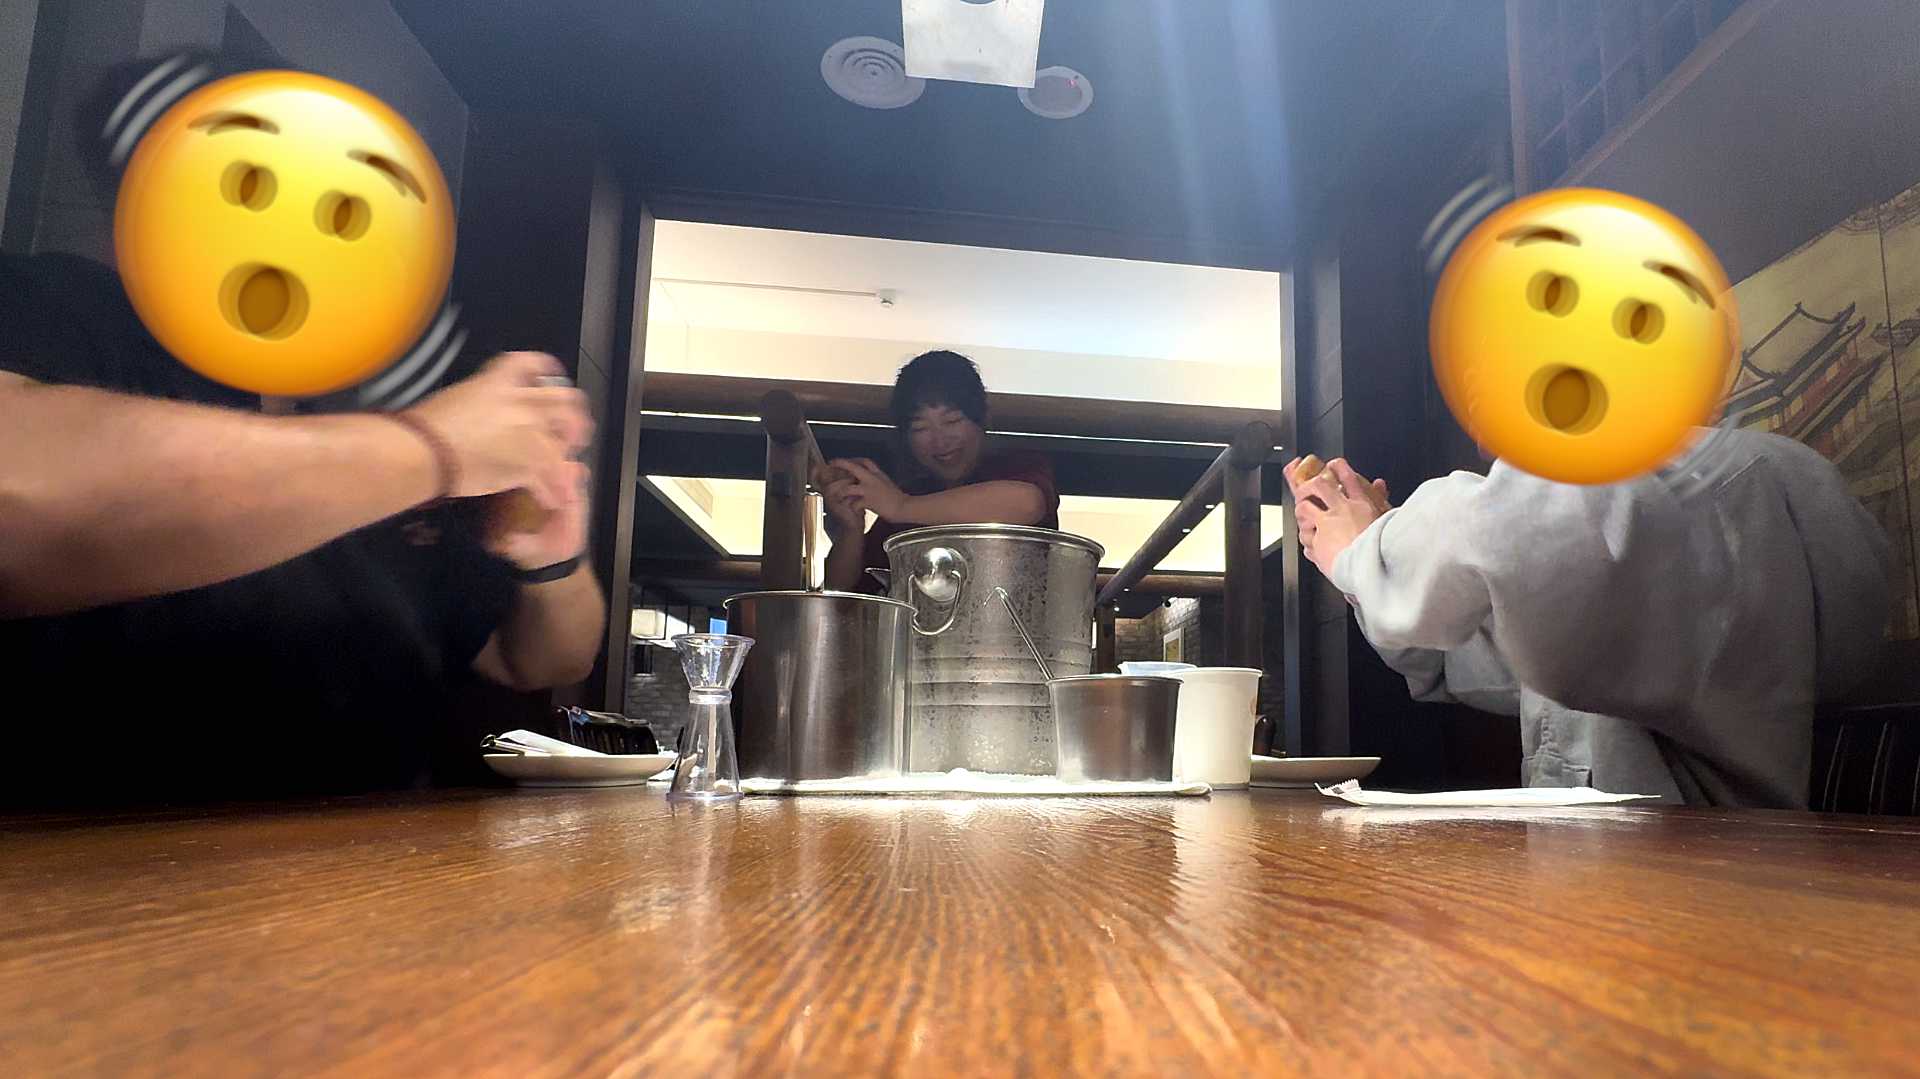 Three people shaking cocktail shakers. The faces of the men on the left and right side of the table are obscured by shaking-style emoji faces. The female teacher is unobscured at the far end of the table.